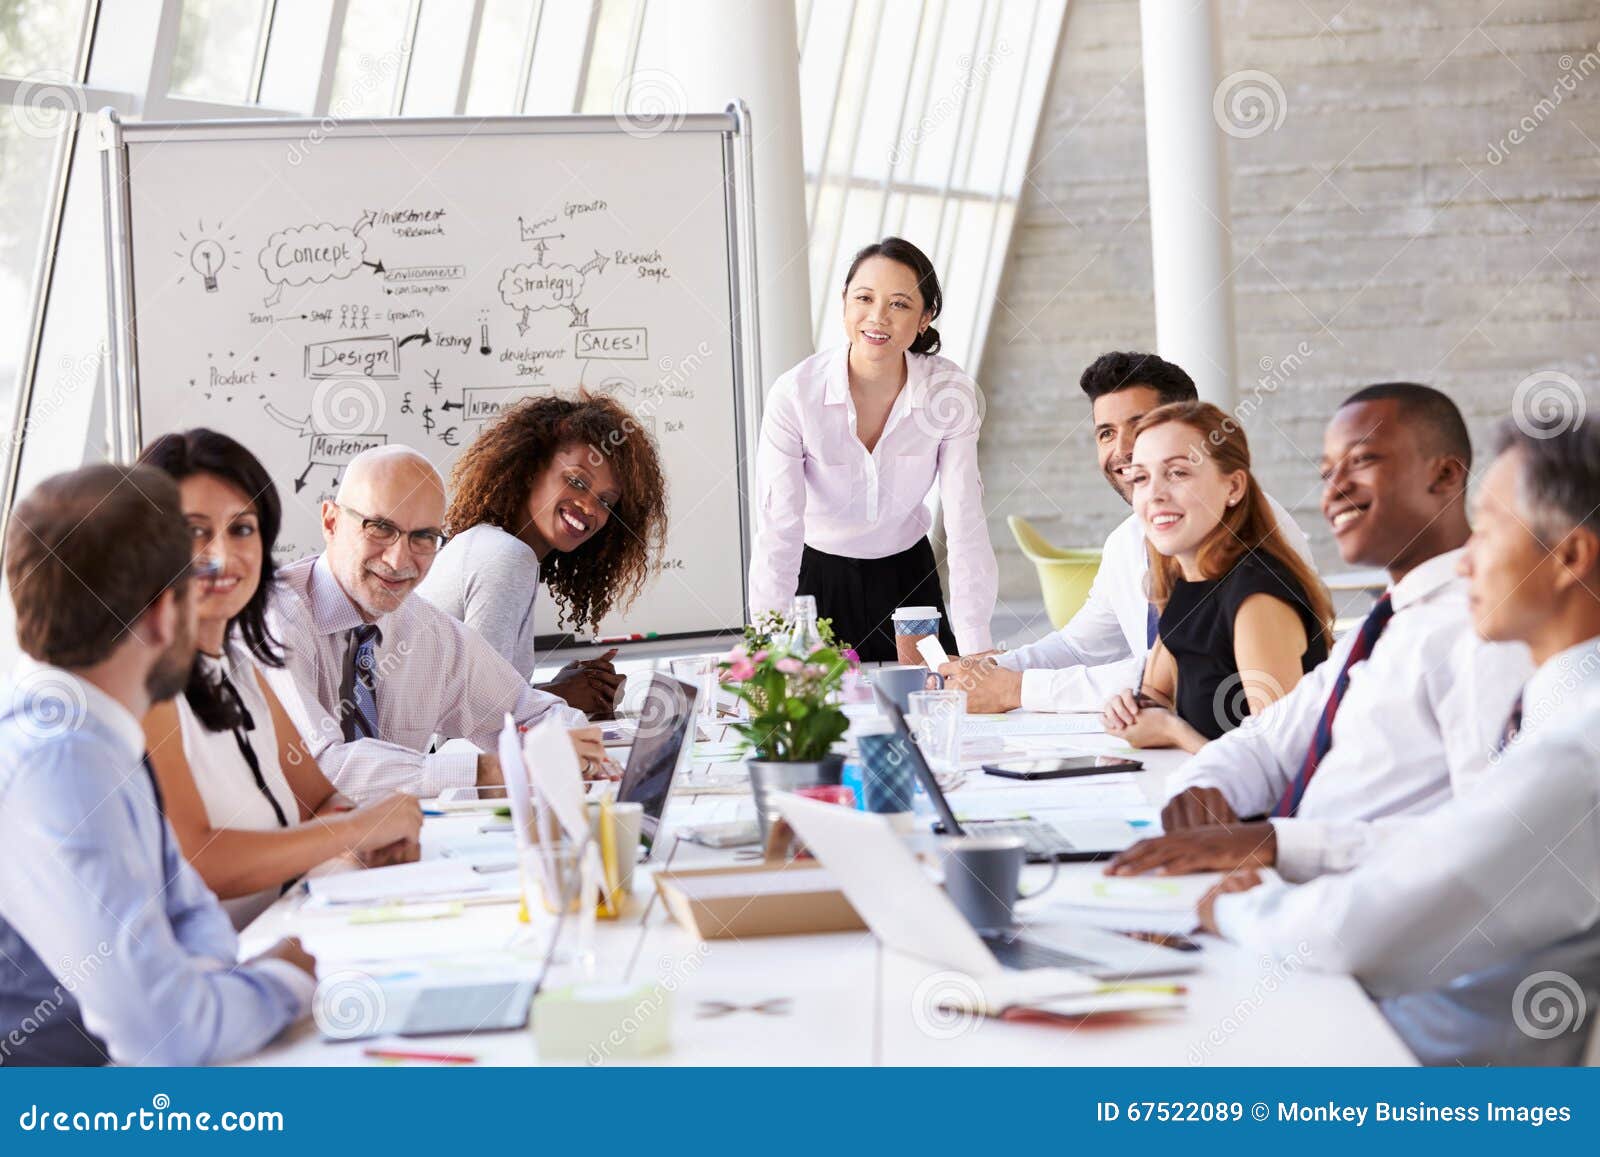 asian businesswoman leading meeting at boardroom table